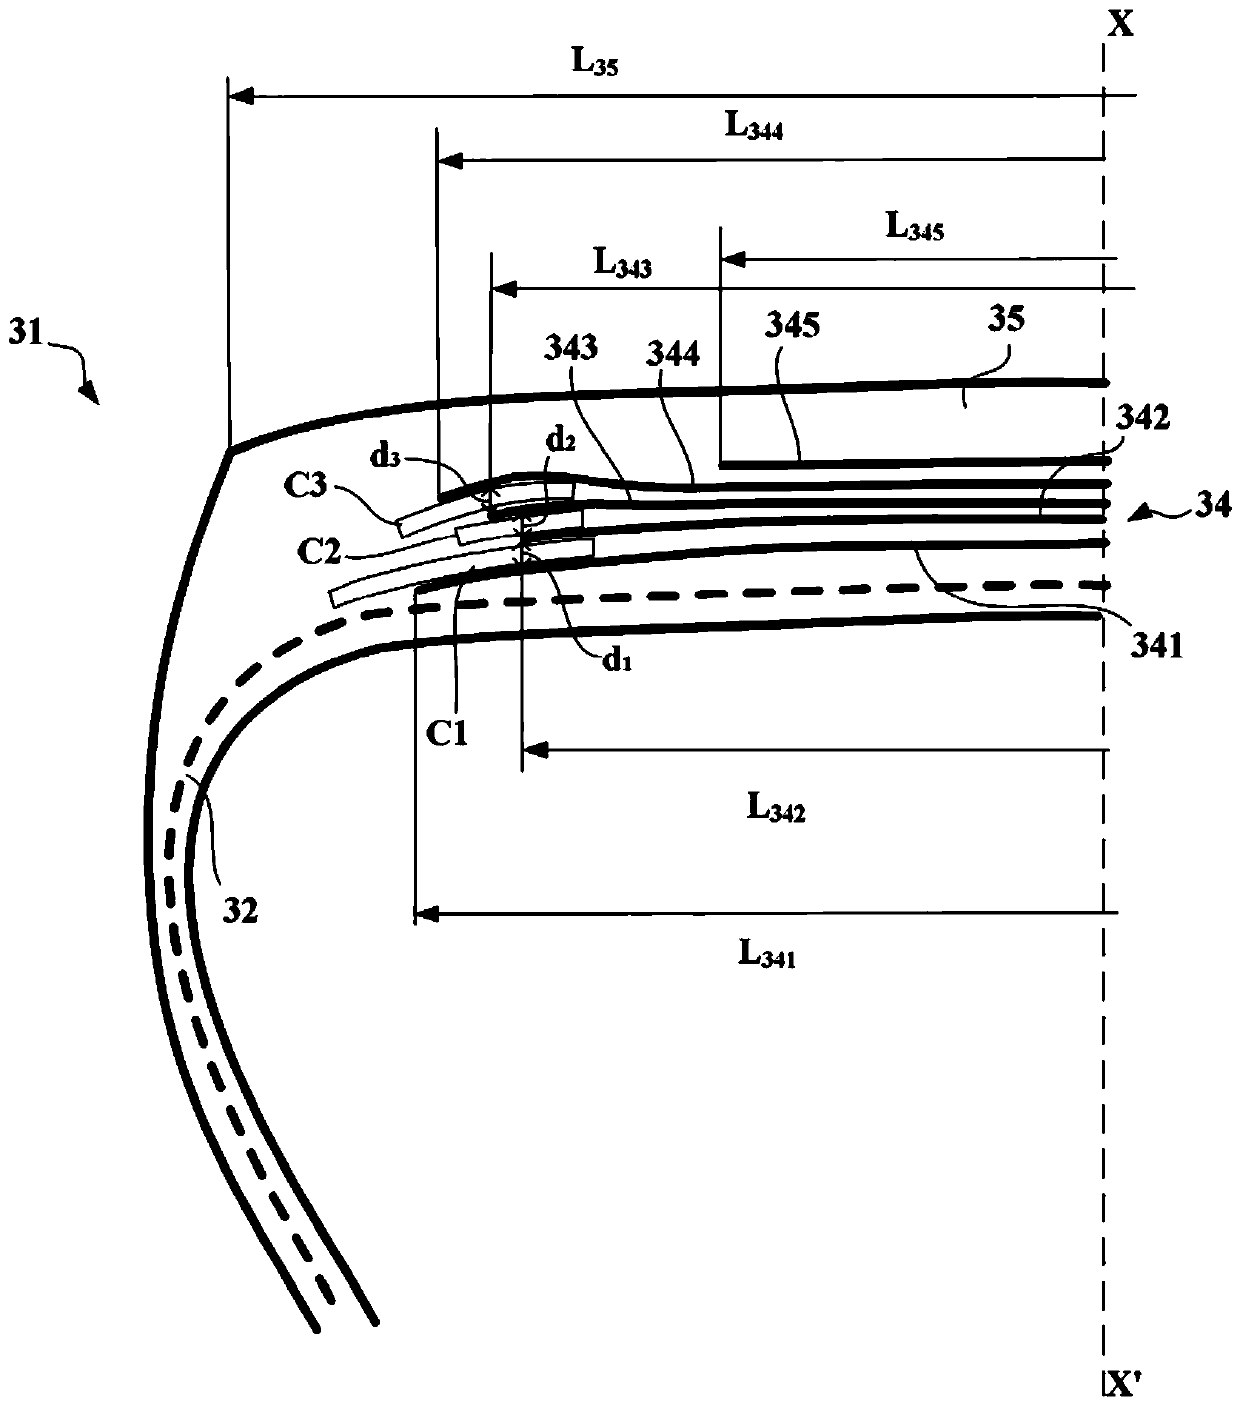 Tires comprising working layers formed from separate wires